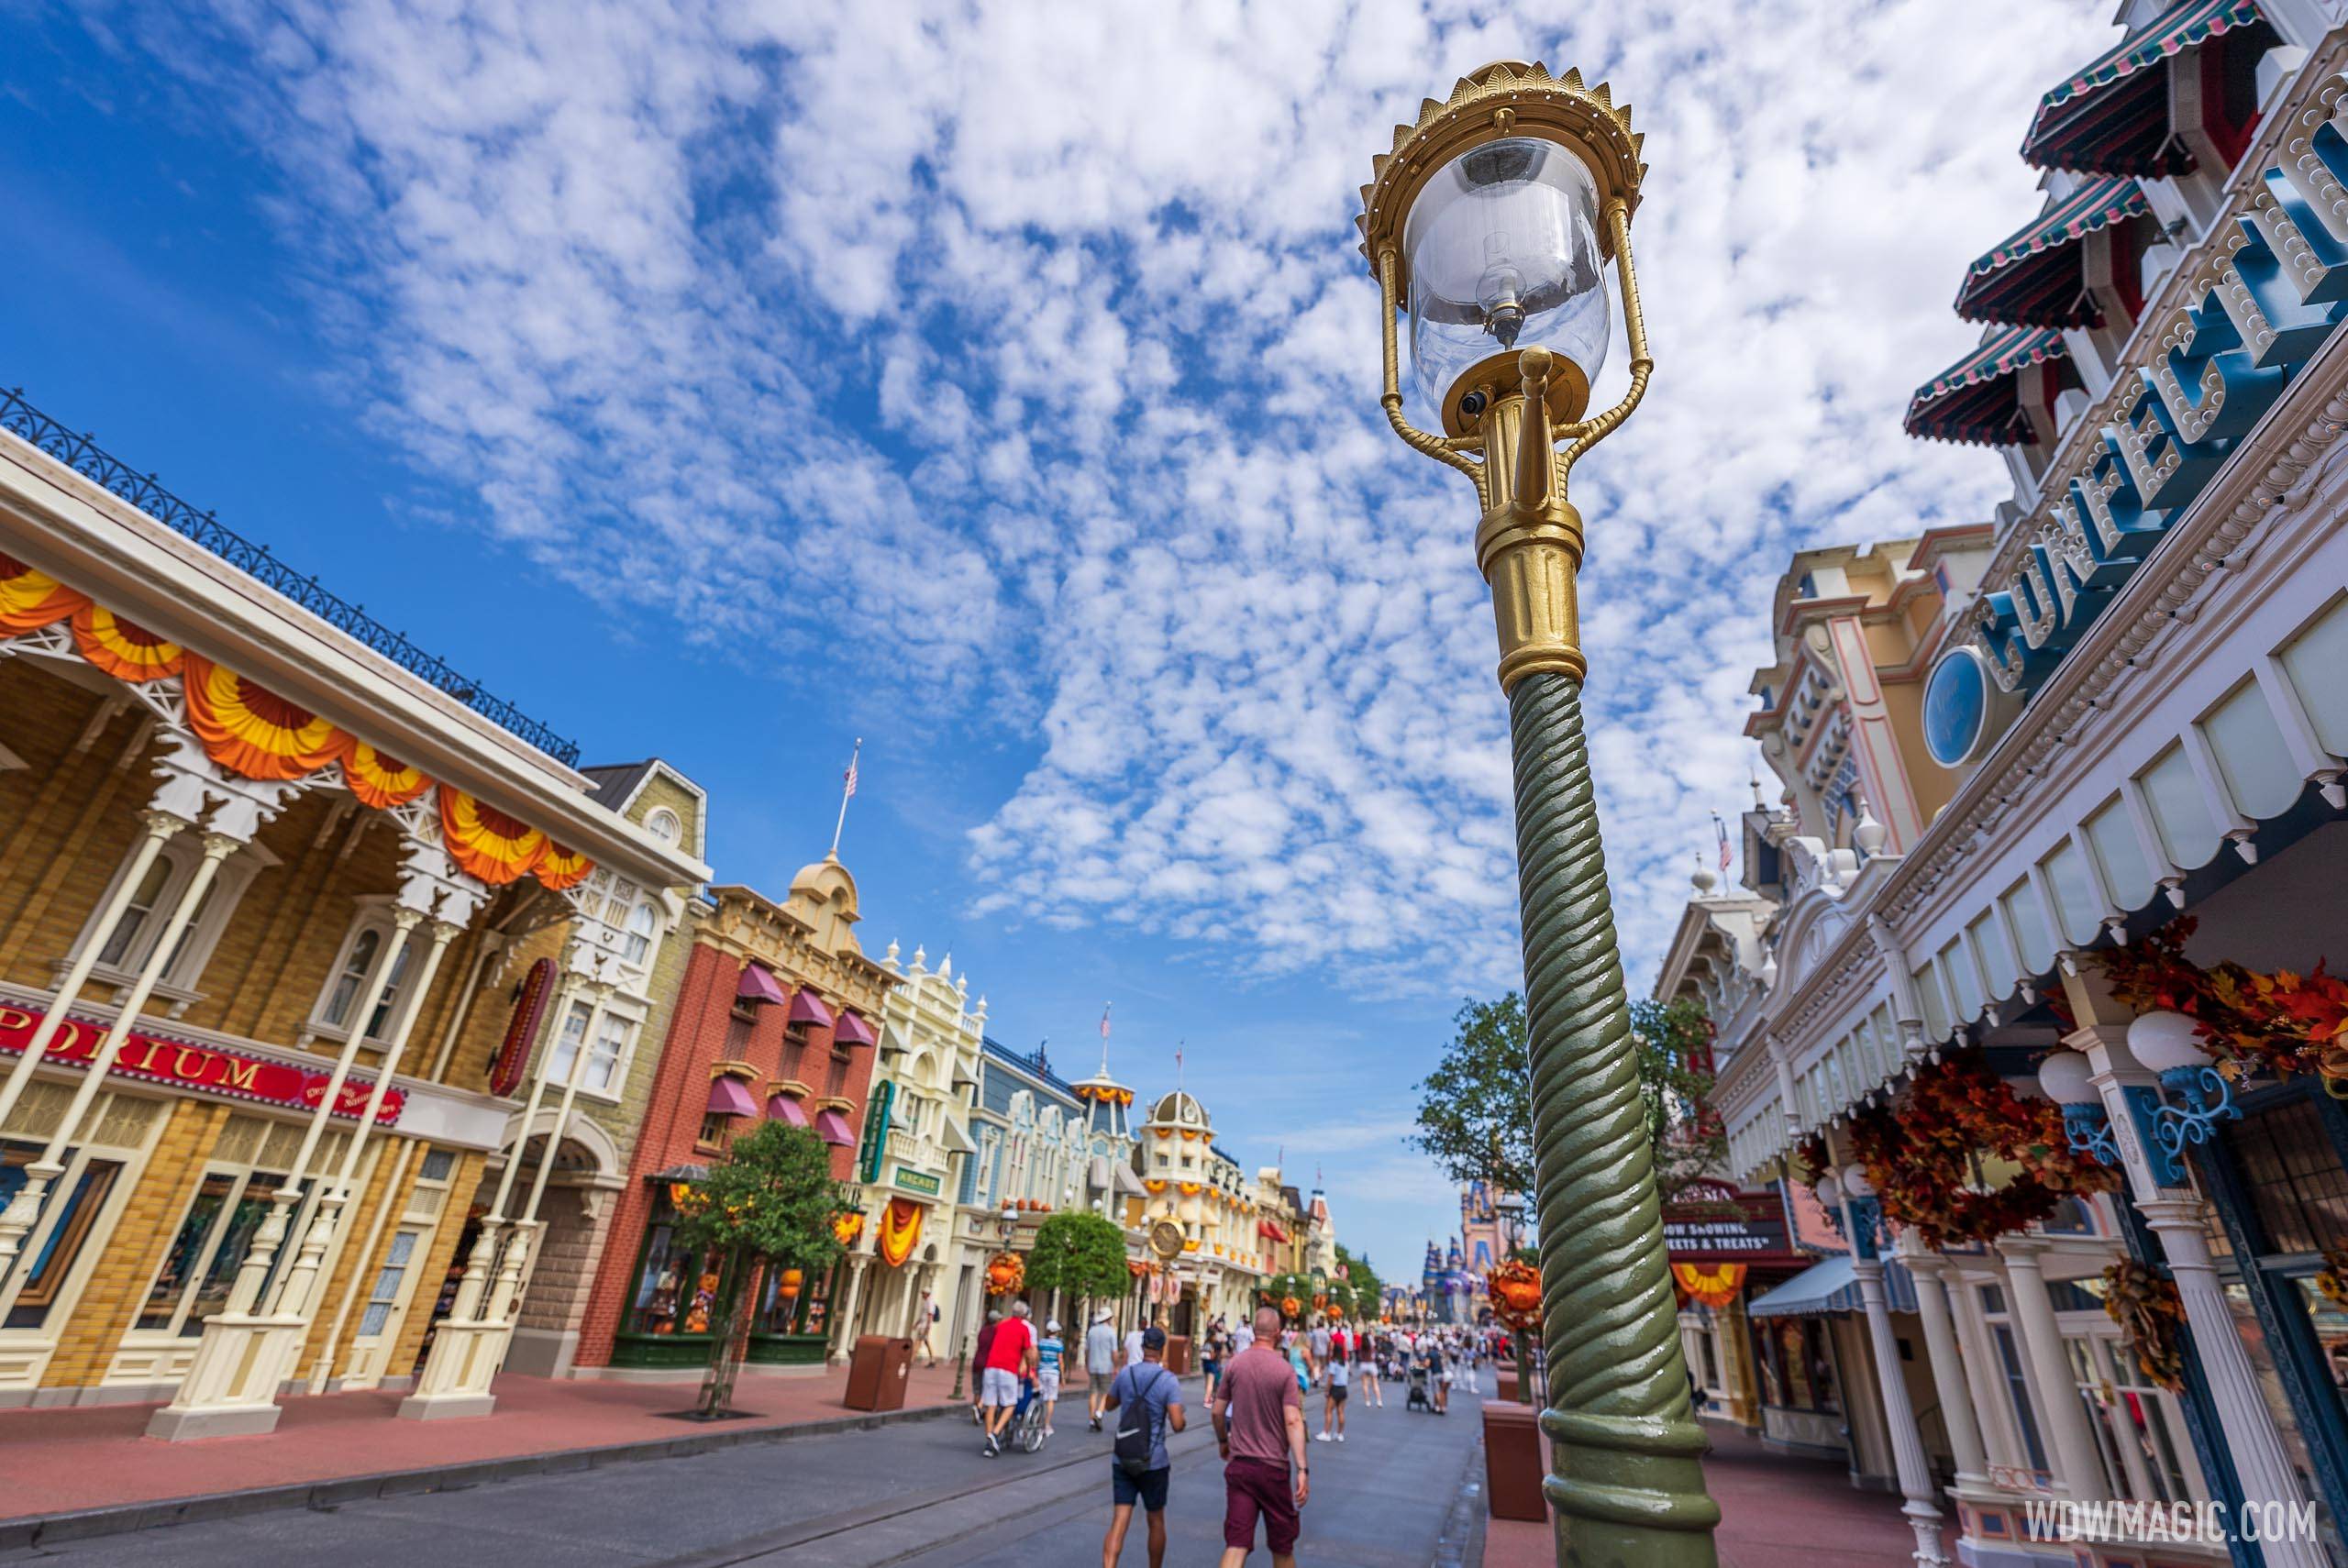 Lamp posts turn to gold on Main Street U.S.A. as the 50th anniversary decor continues to be installed